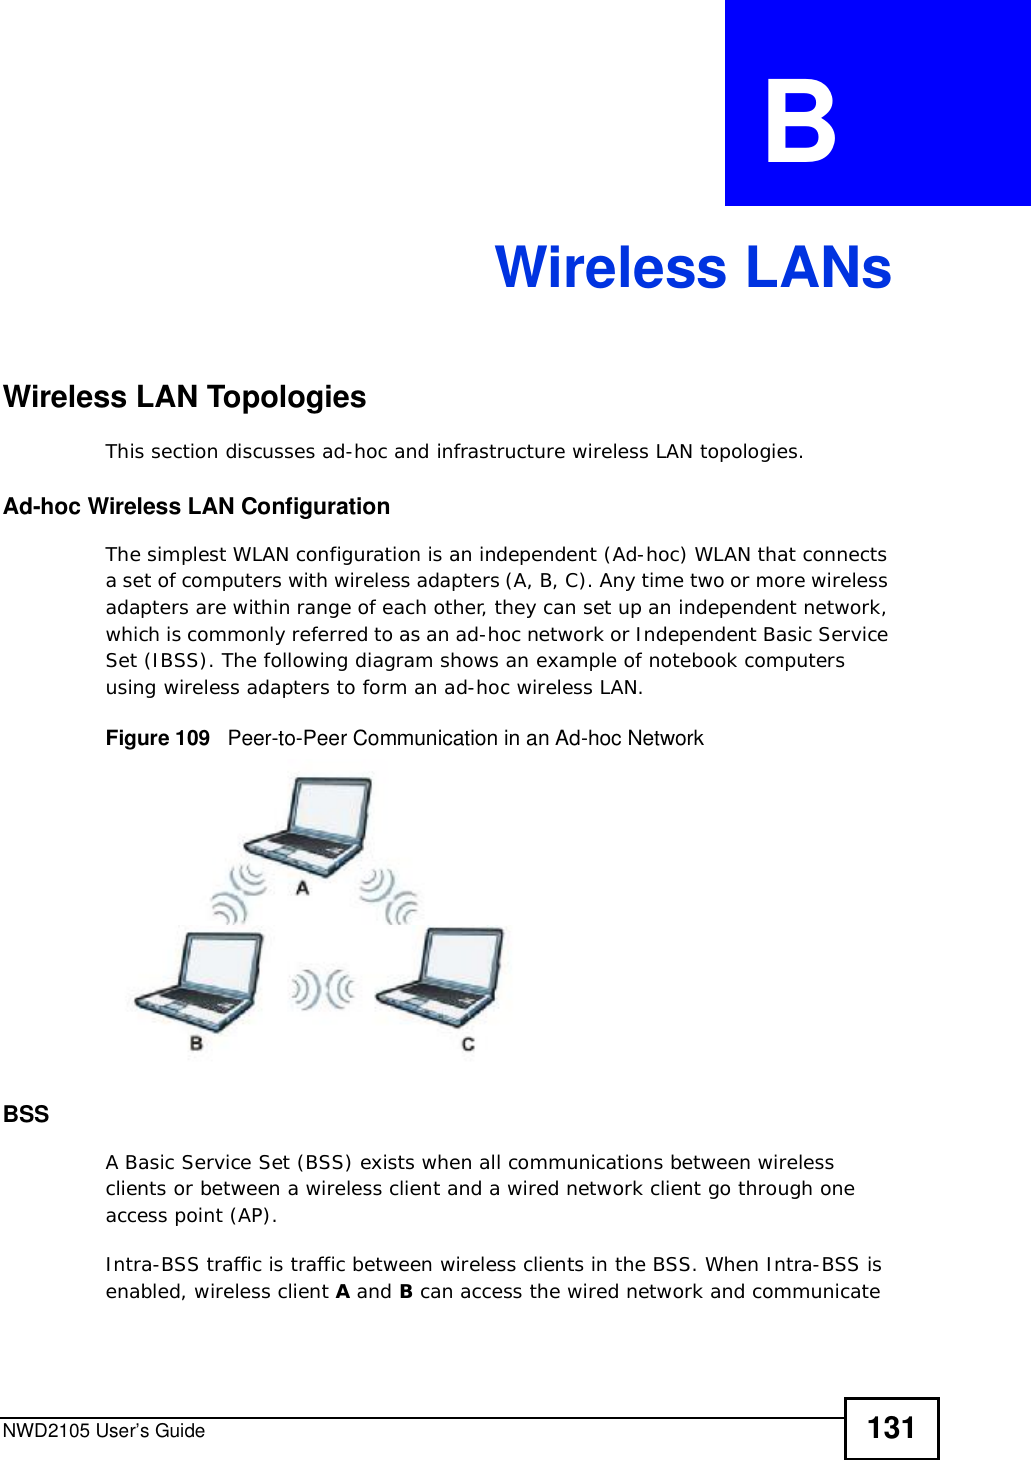 NWD2105 User’s Guide 131APPENDIX  B Wireless LANsWireless LAN TopologiesThis section discusses ad-hoc and infrastructure wireless LAN topologies.Ad-hoc Wireless LAN ConfigurationThe simplest WLAN configuration is an independent (Ad-hoc) WLAN that connects a set of computers with wireless adapters (A, B, C). Any time two or more wireless adapters are within range of each other, they can set up an independent network, which is commonly referred to as an ad-hoc network or Independent Basic Service Set (IBSS). The following diagram shows an example of notebook computers using wireless adapters to form an ad-hoc wireless LAN. Figure 109   Peer-to-Peer Communication in an Ad-hoc NetworkBSSA Basic Service Set (BSS) exists when all communications between wireless clients or between a wireless client and a wired network client go through one access point (AP). Intra-BSS traffic is traffic between wireless clients in the BSS. When Intra-BSS is enabled, wireless client A and B can access the wired network and communicate 